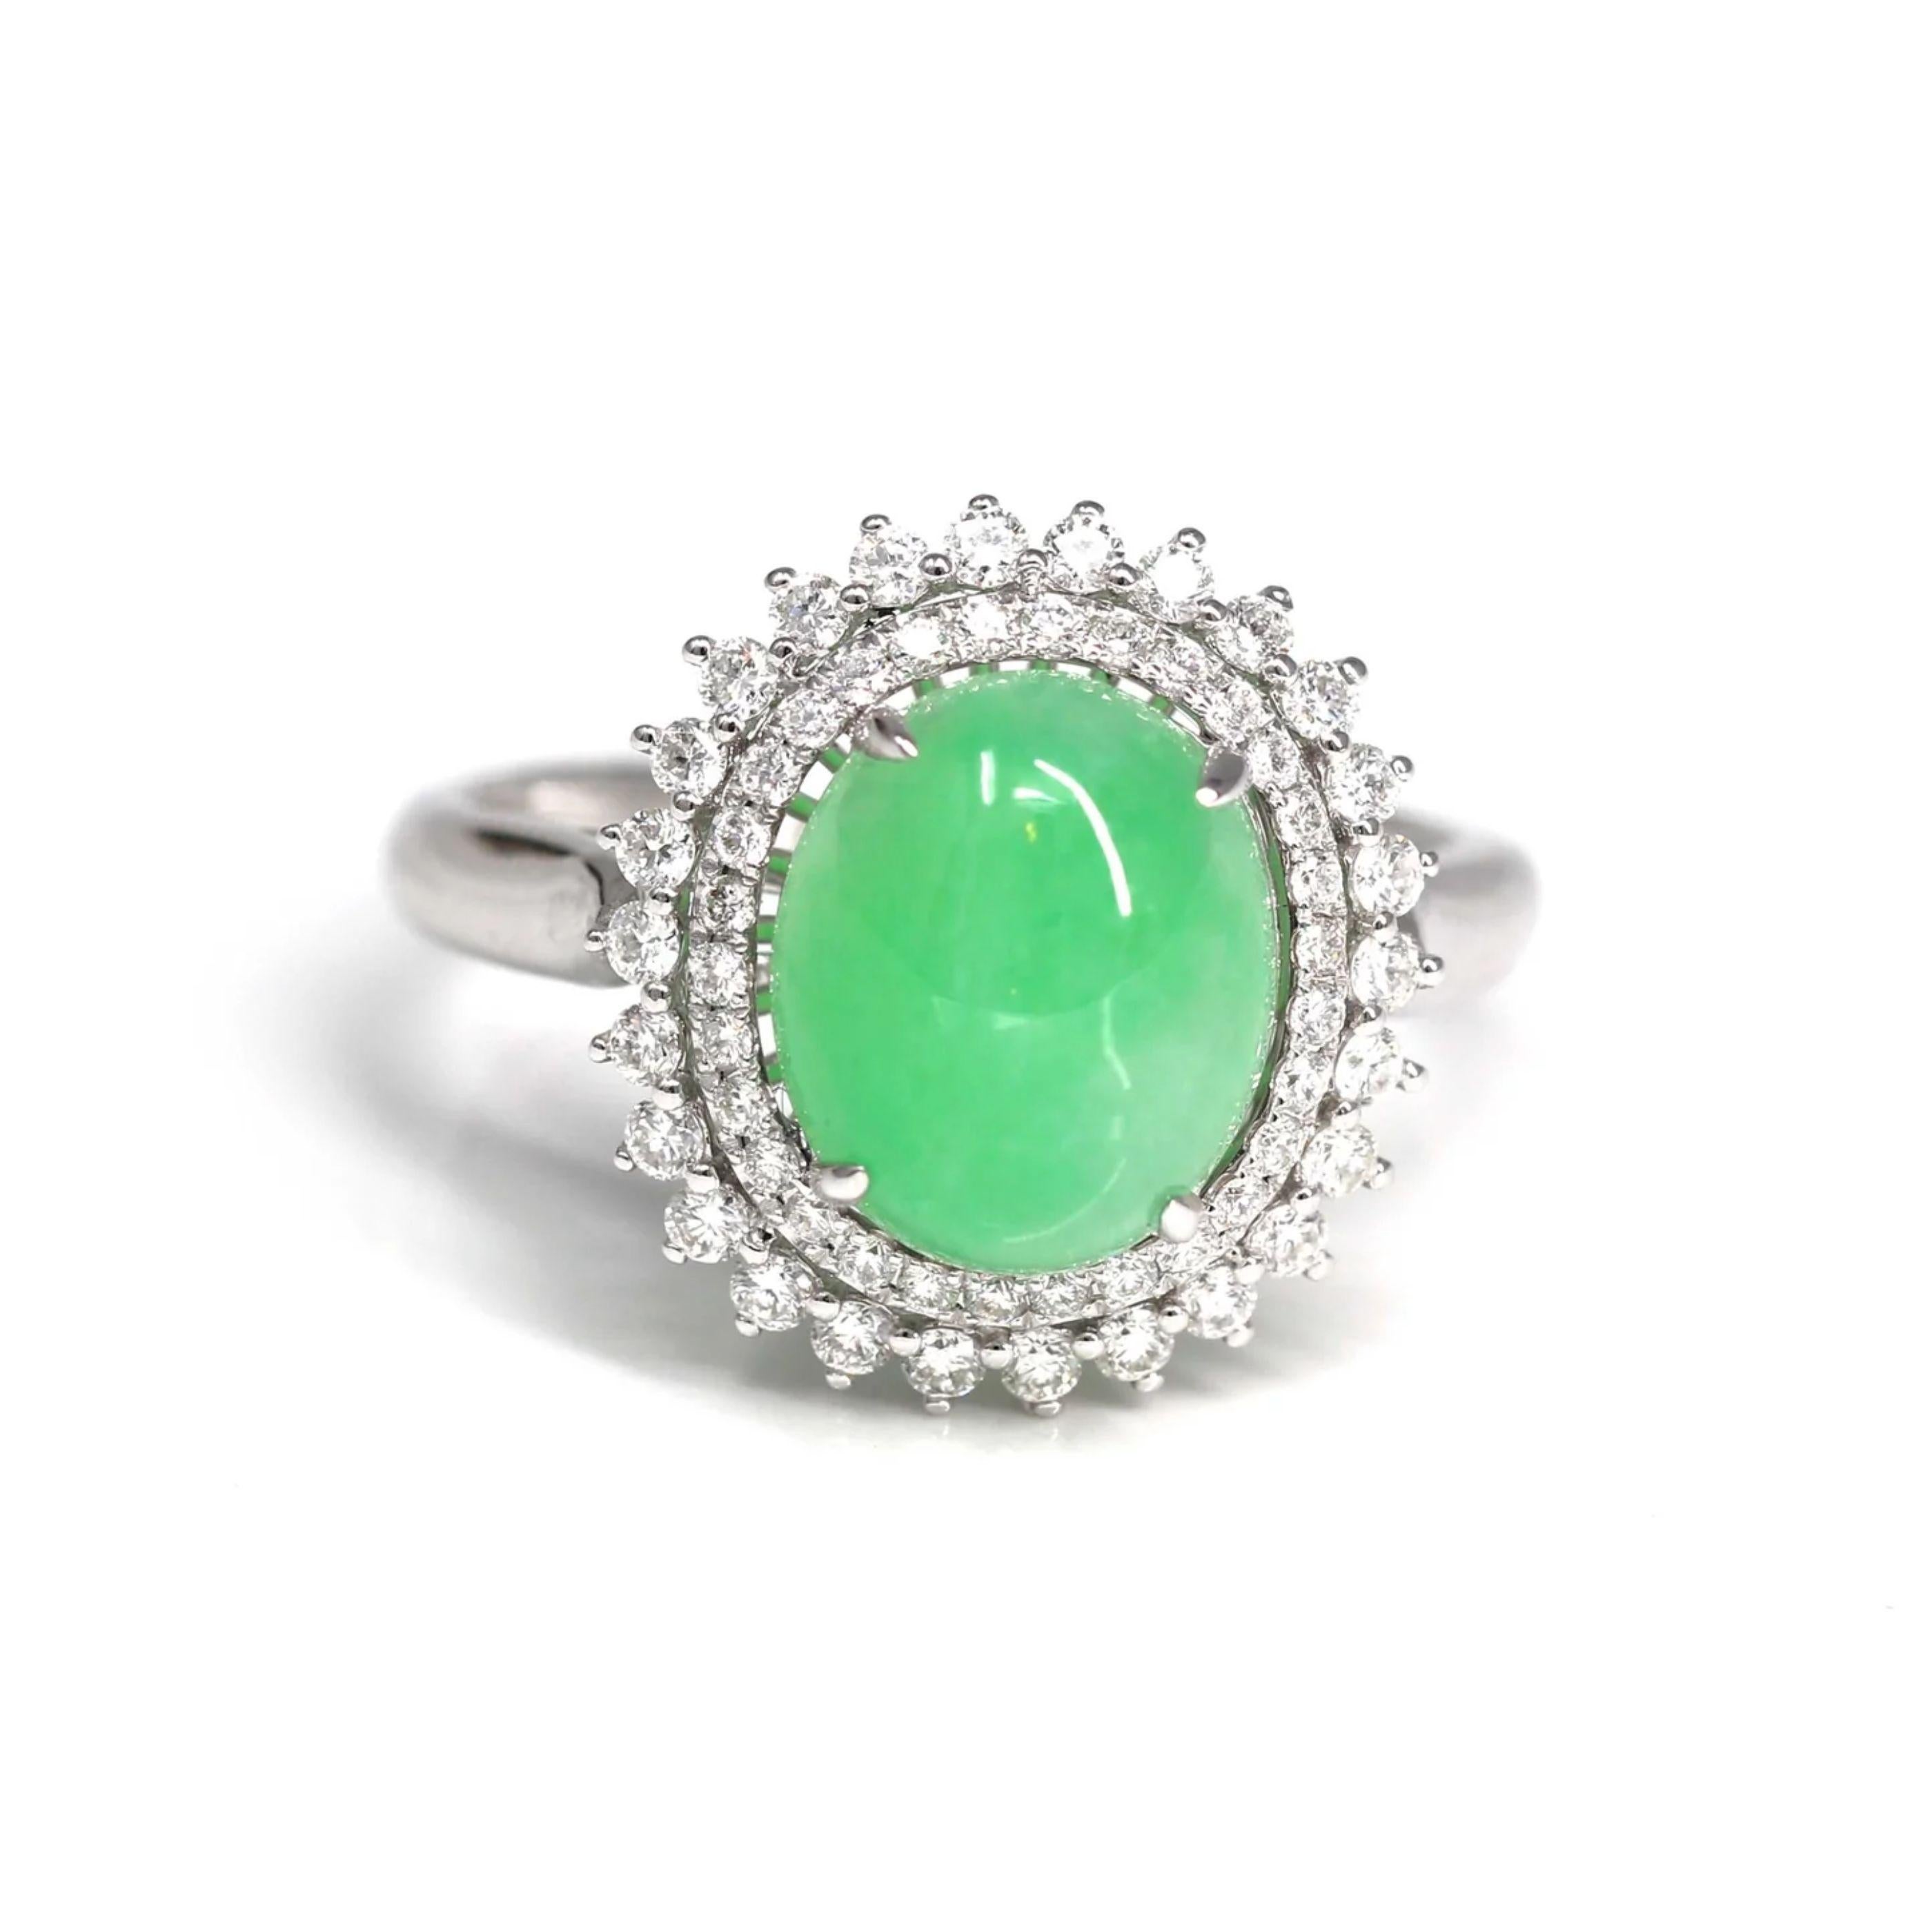 * DESIGN CONCEPT--- Inspired by the natural beauty of genuine Burmese Imperial Green Jadeite, the rich, beautiful apple green color is found on no other stone. This one of a kind engagement ring combines the natural beauty of the extremely rare gem